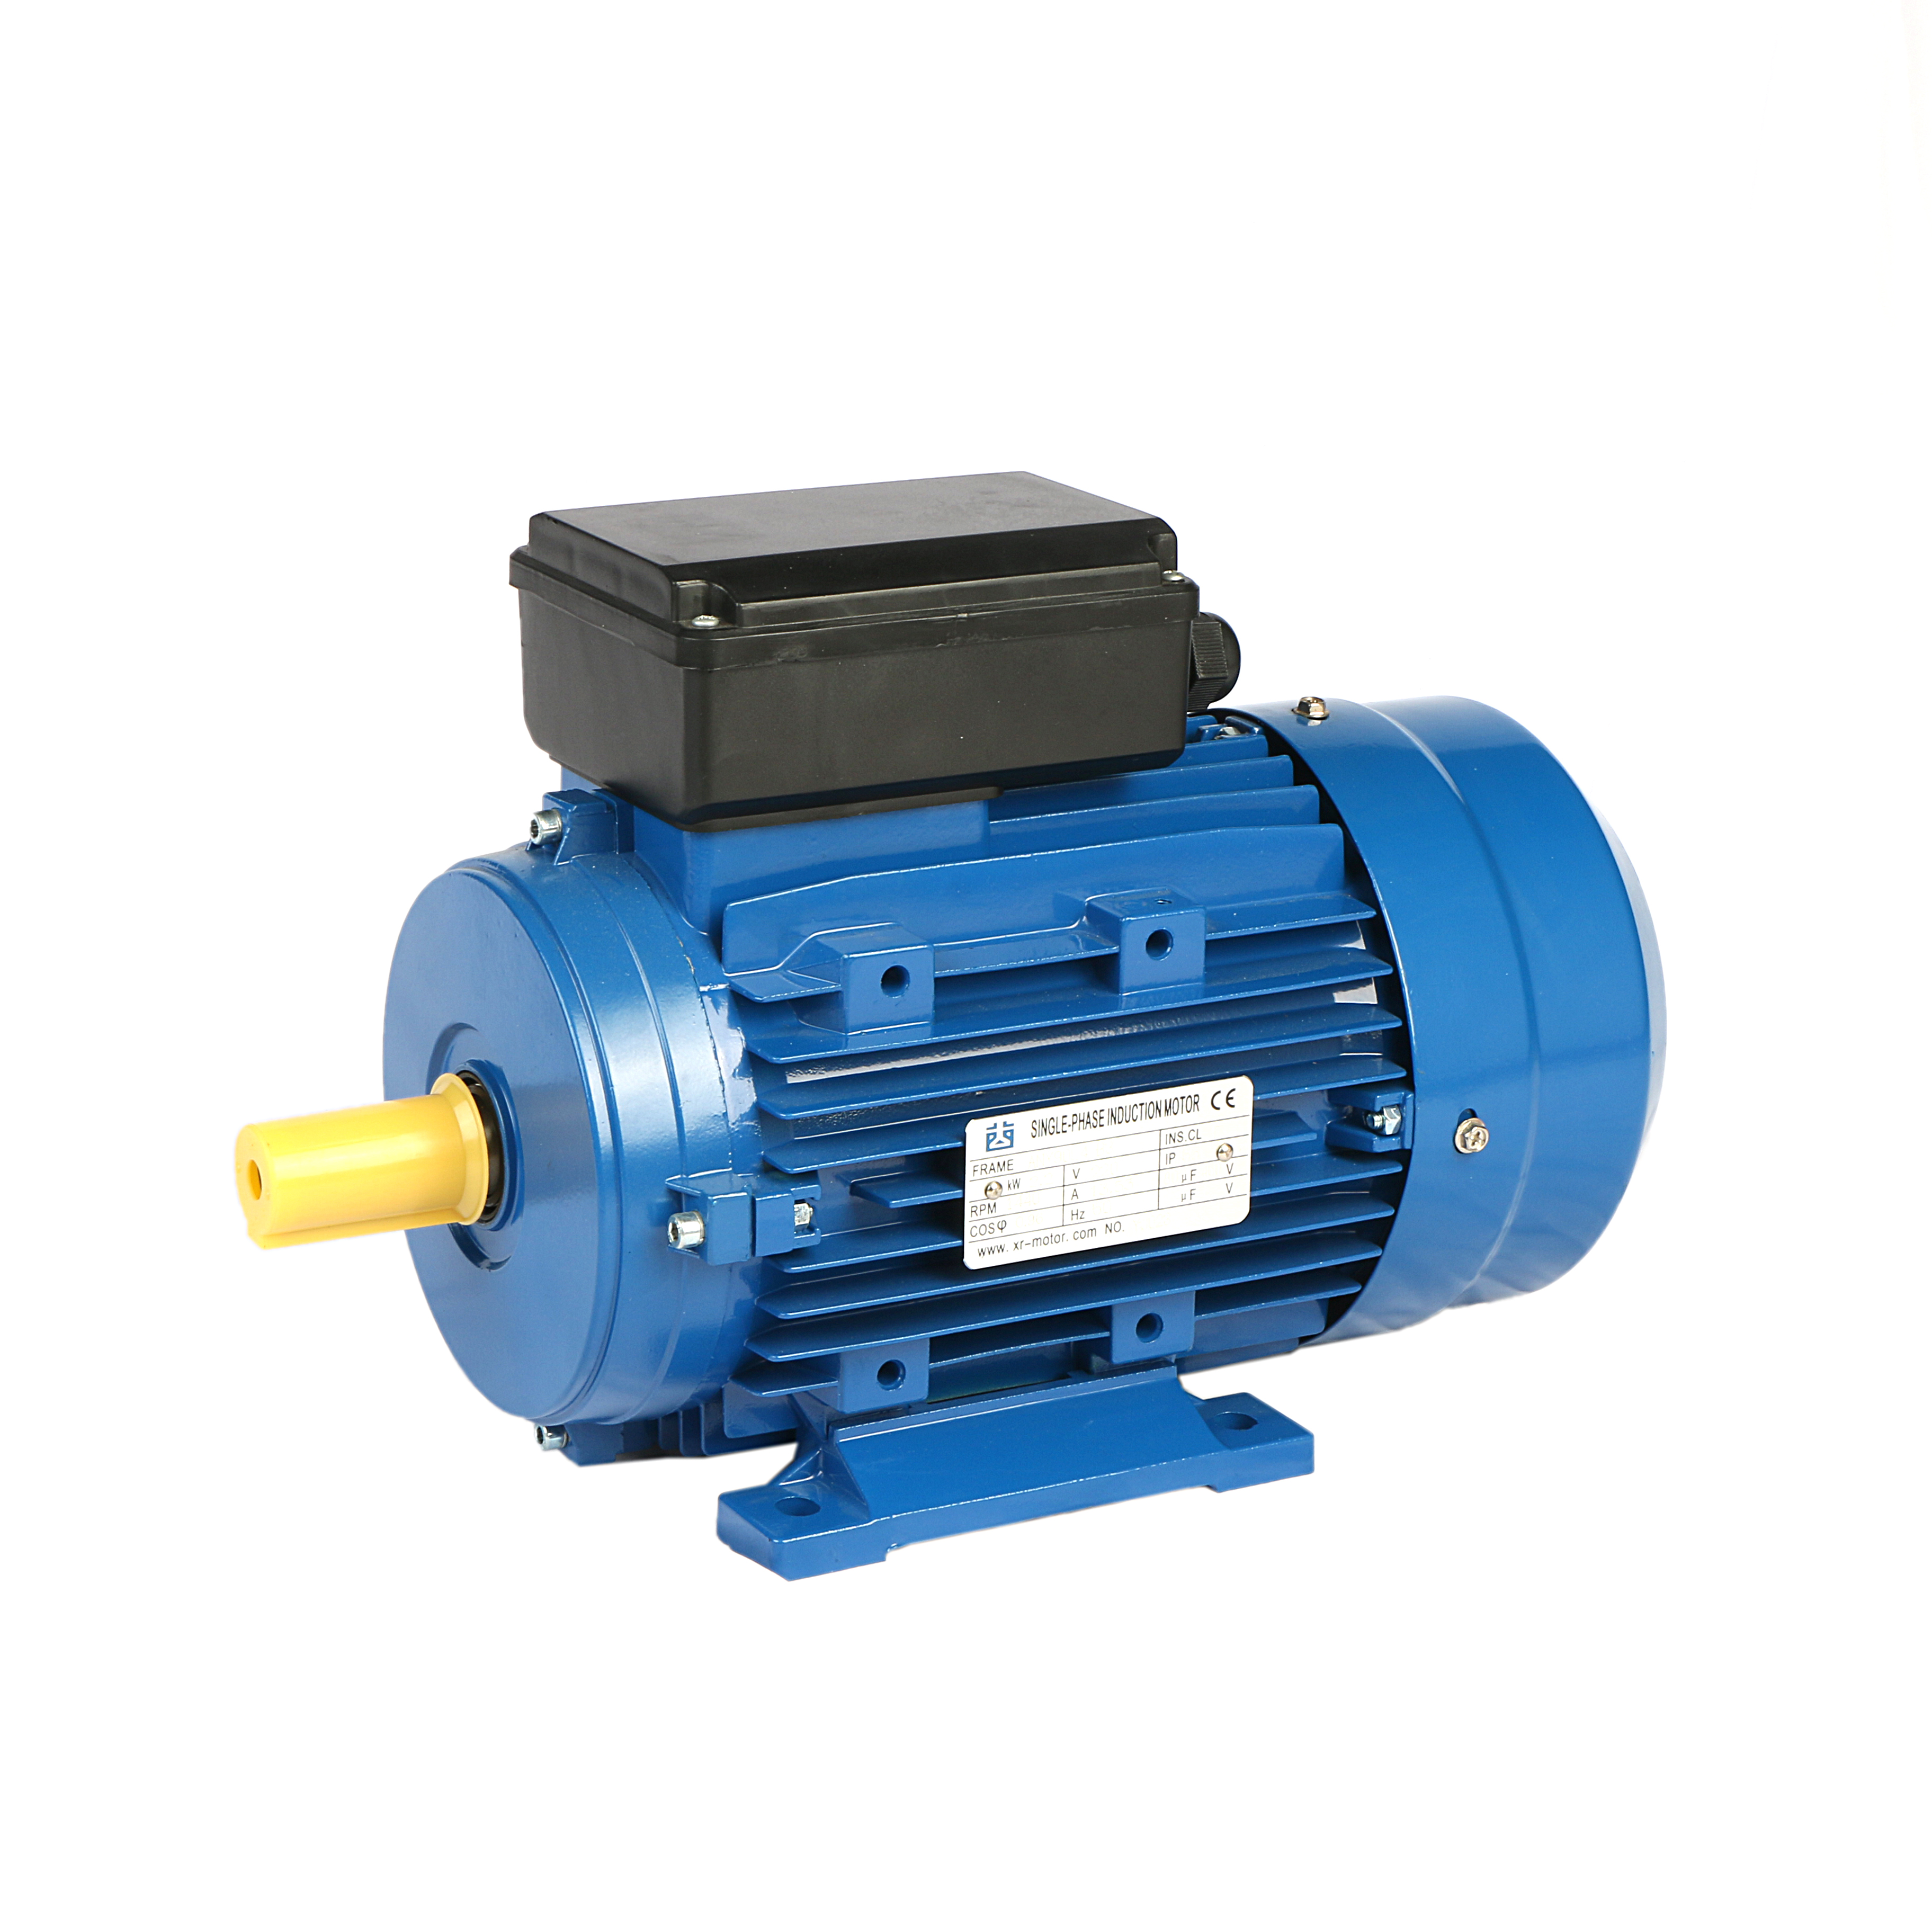 ANP Gost Standard Series Three Phase Asynchronous Motors